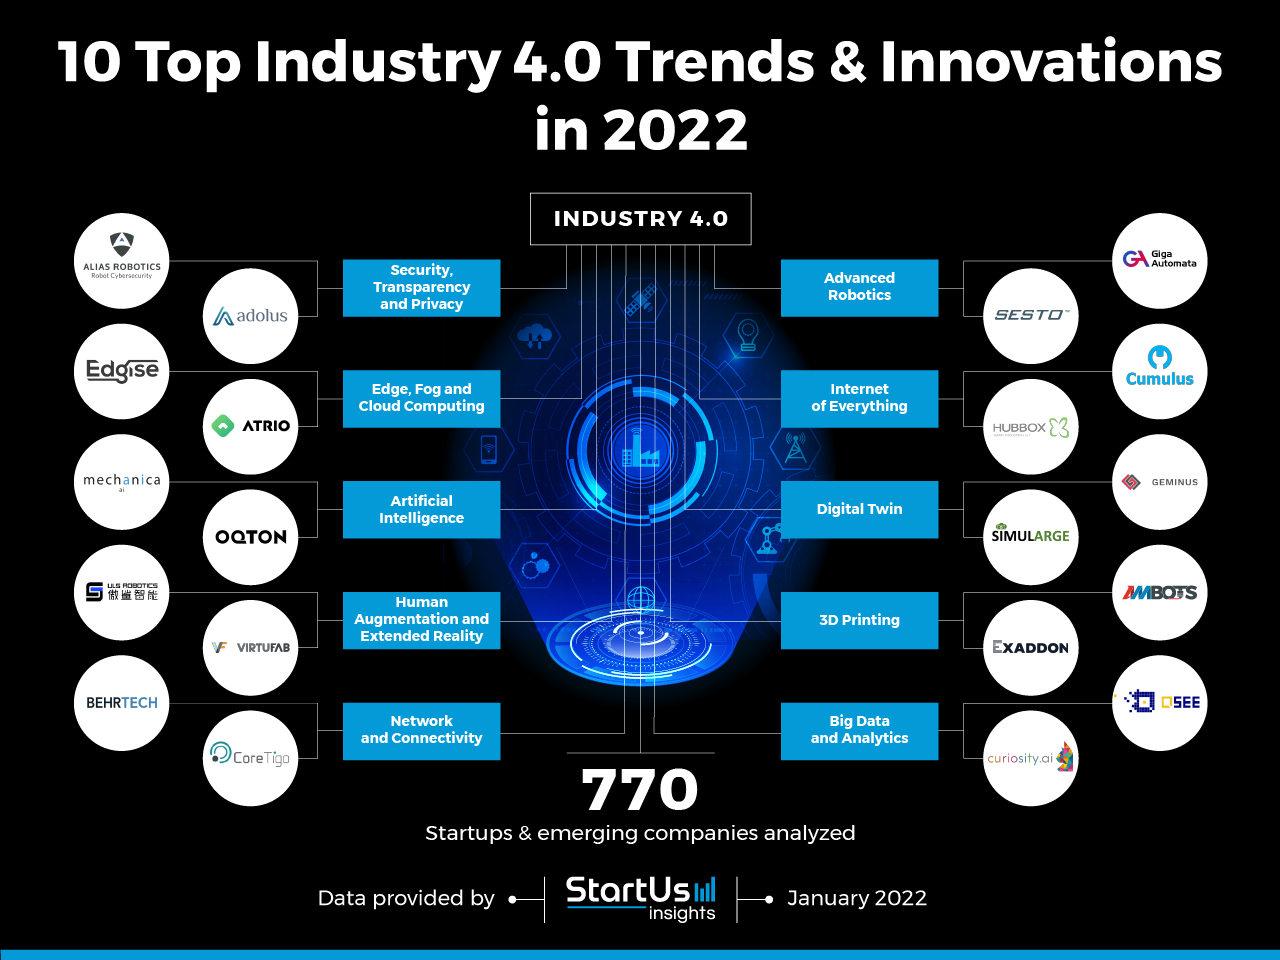 Industry-4.0-Trends-Research-Startups-InnovationMap-StartUs-Insights-noresize